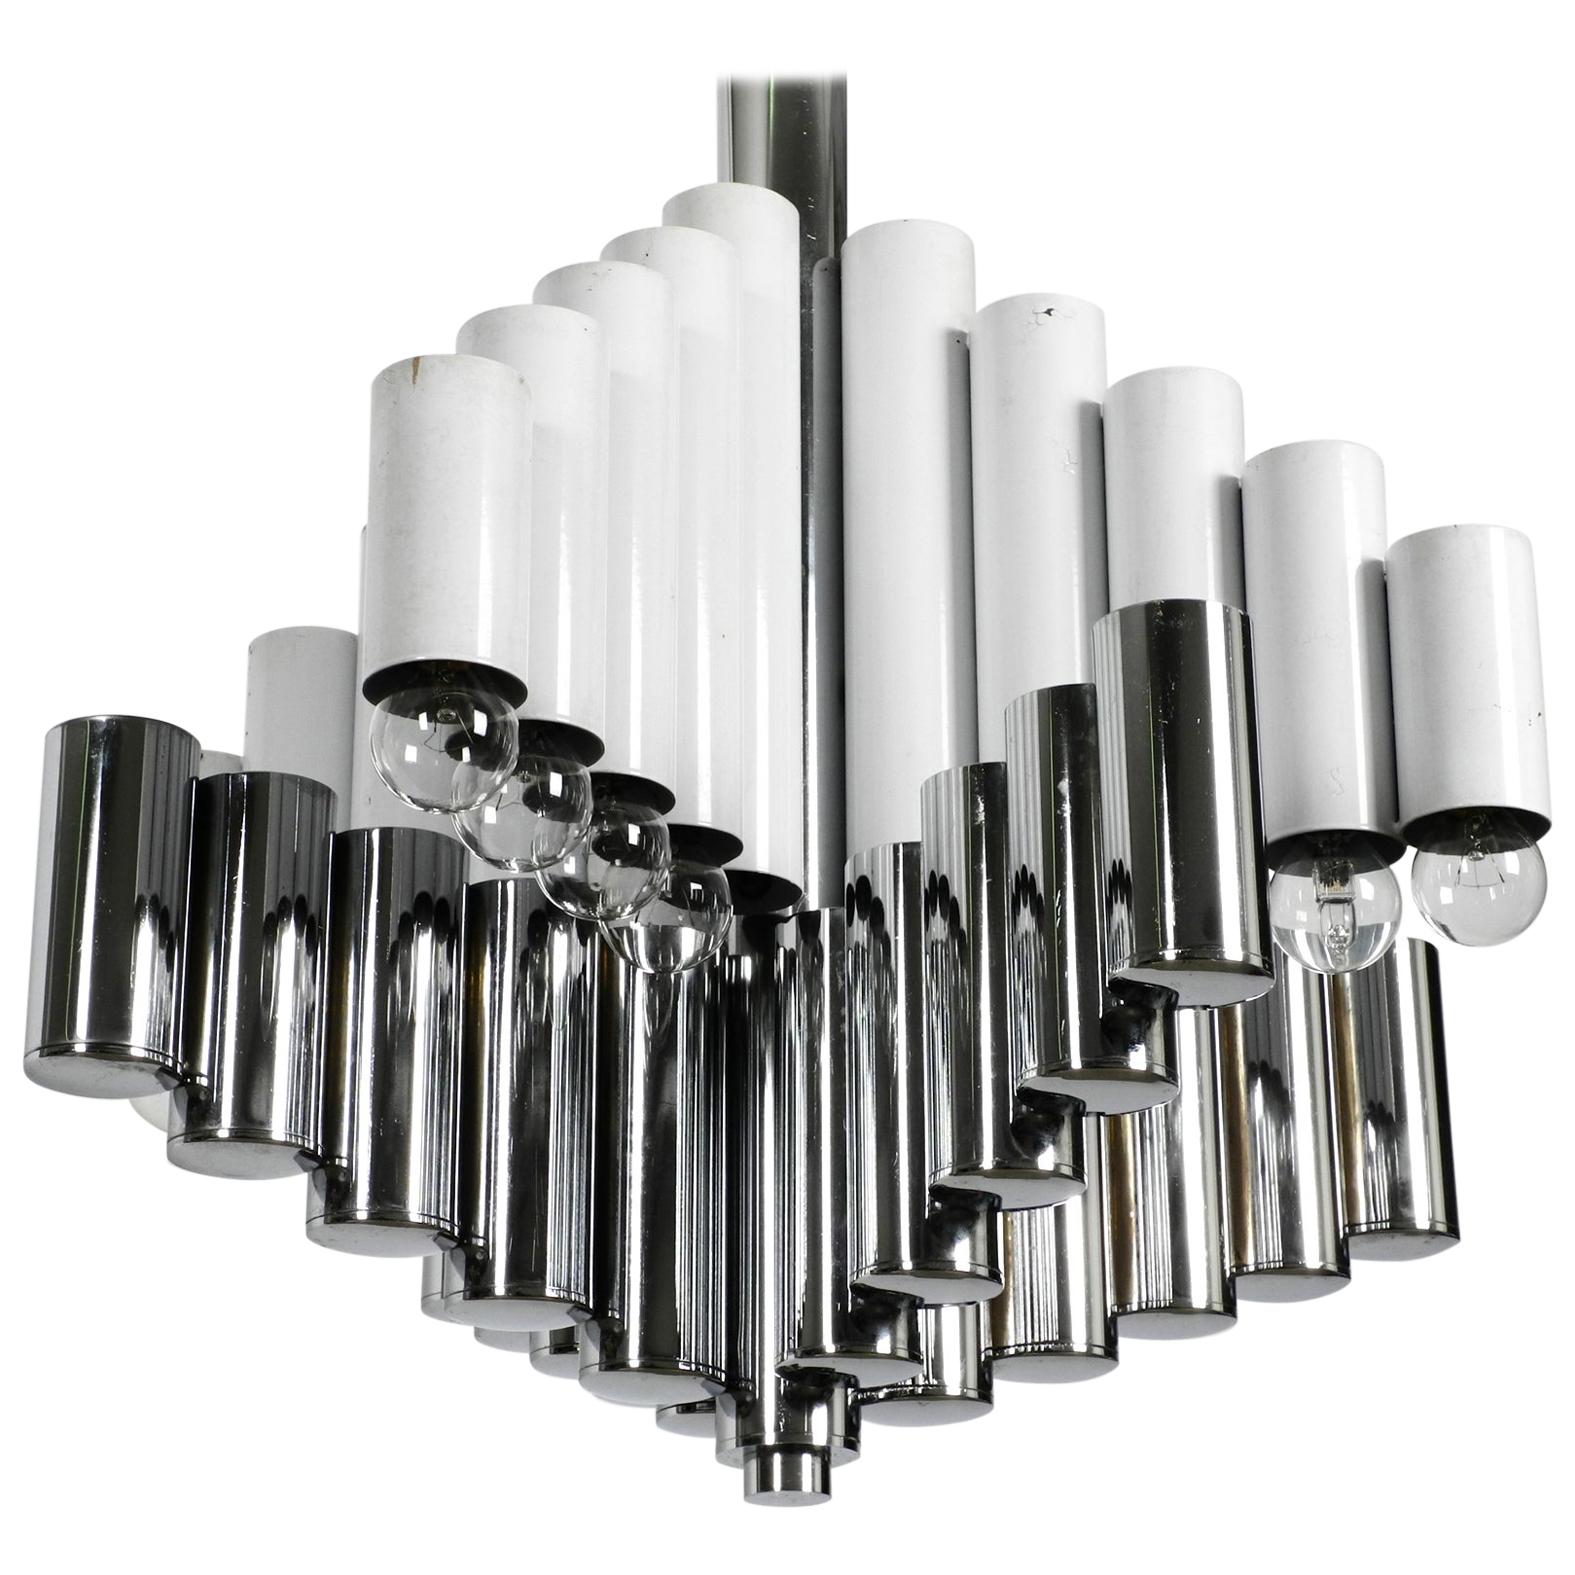 XXL 1960s Heavy Metal Chandelier in Space Age Design with 16 Sockets